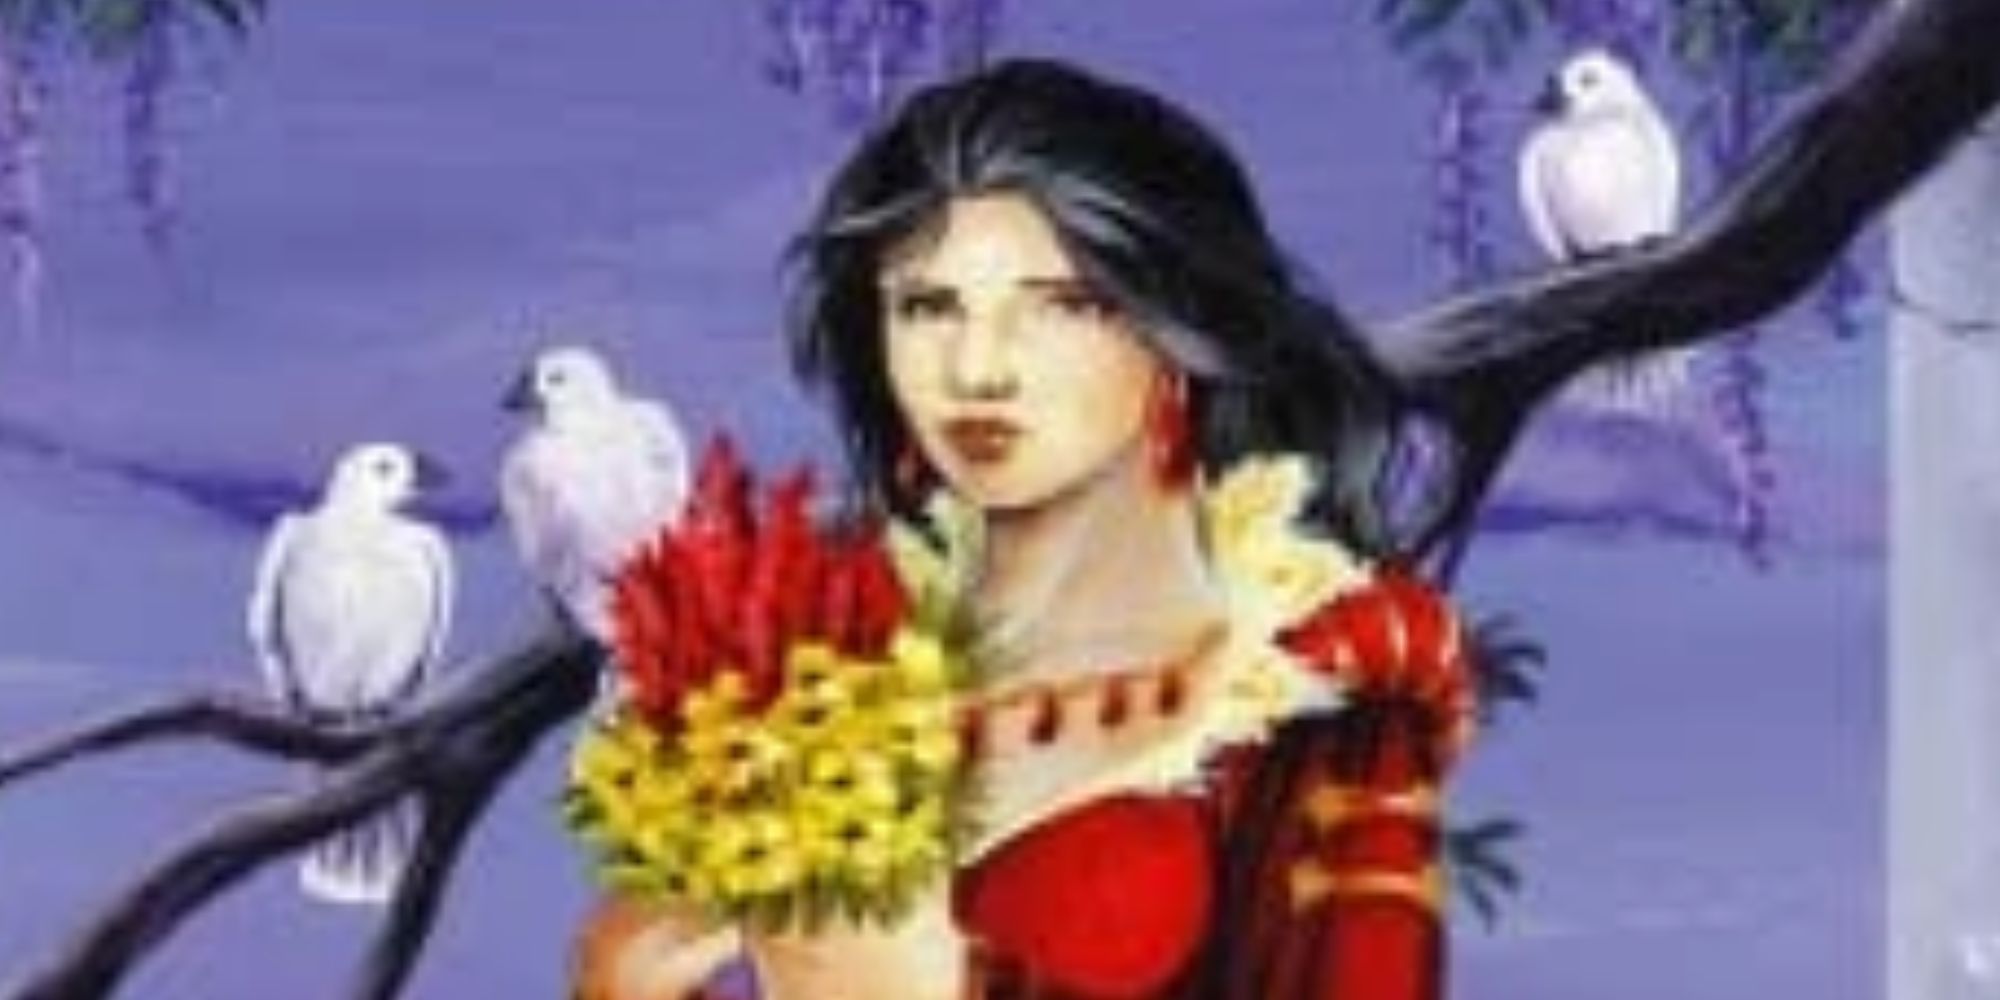 Elaida, surrounded by doves, as she appears in the Wheel of Time CCG